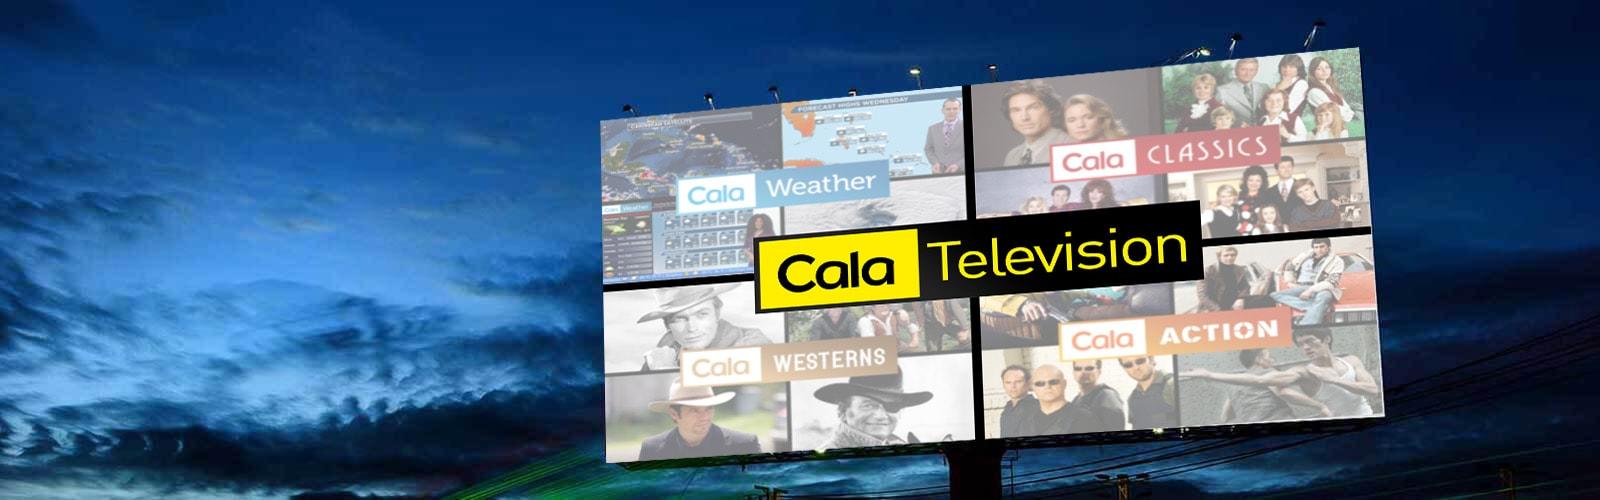 Billboard with CalaTelevision Montage